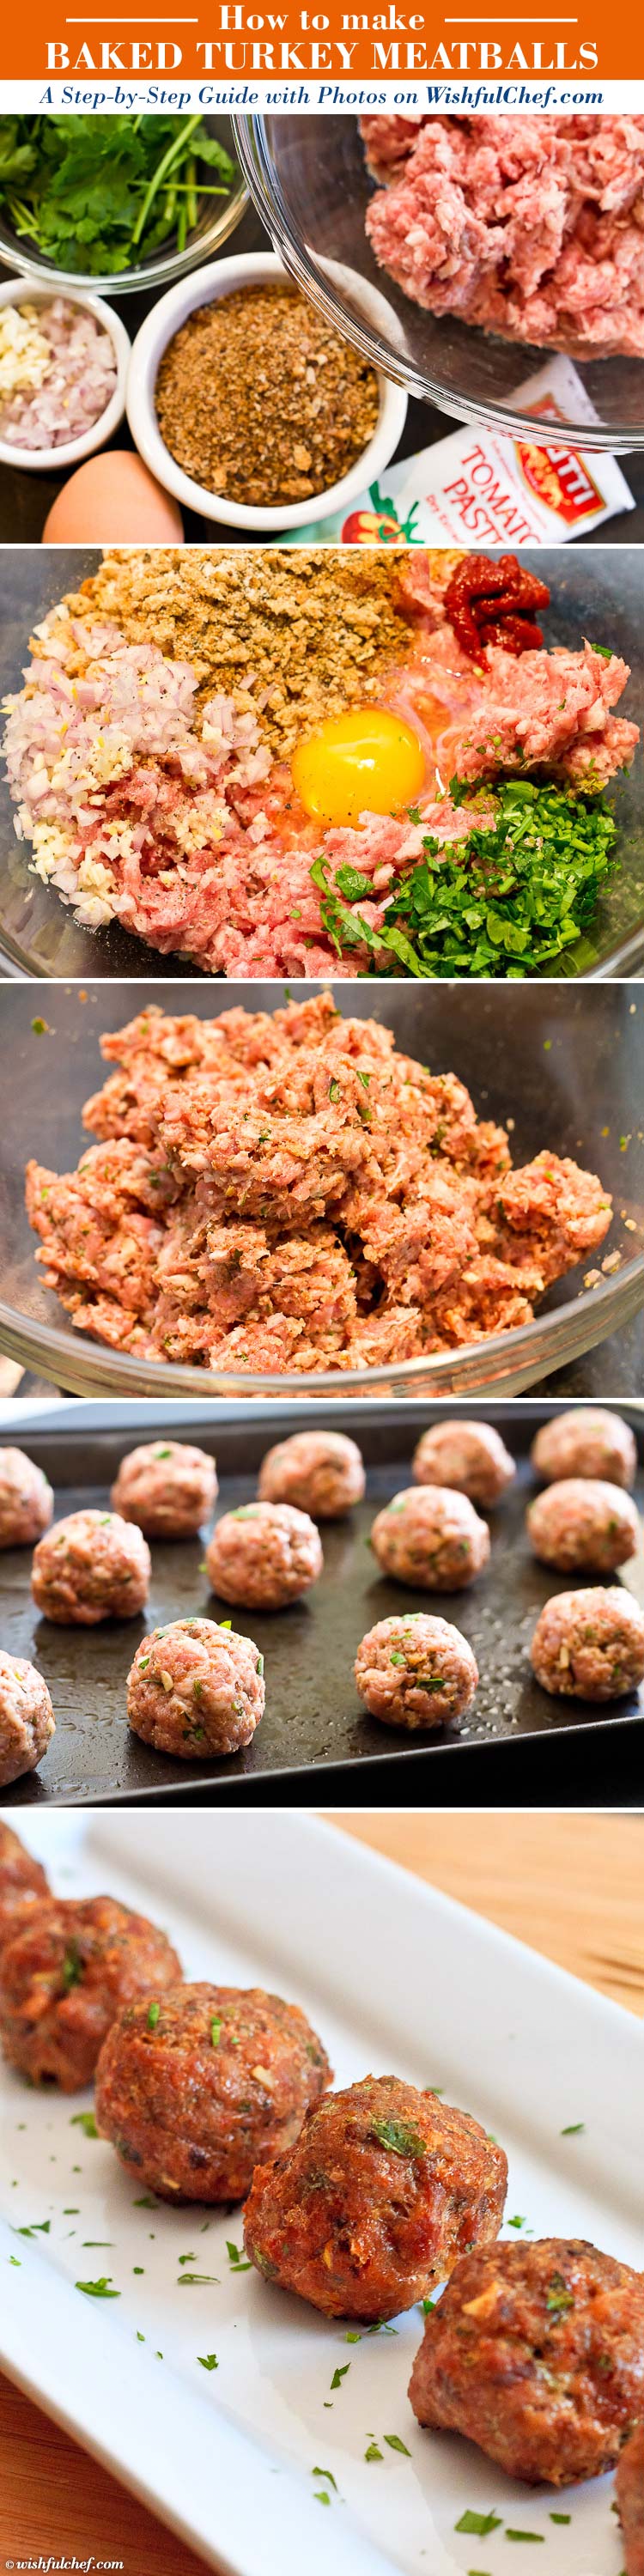 Step-By-Step: How to Make Baked Turkey Meatballs